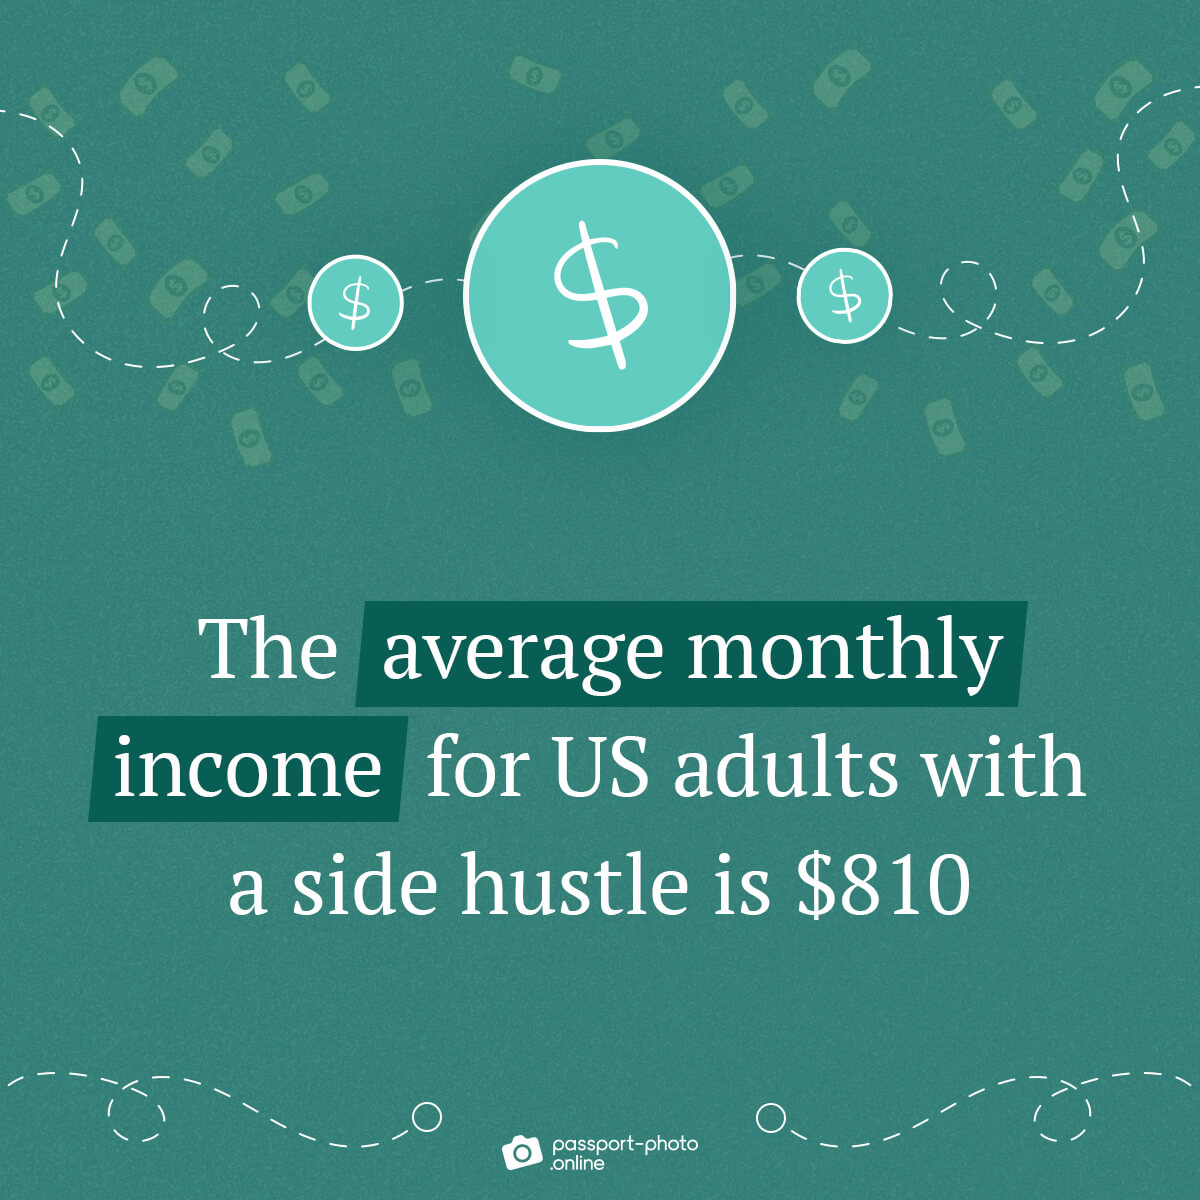 The average monthly income for US adults with a side hustle is $810